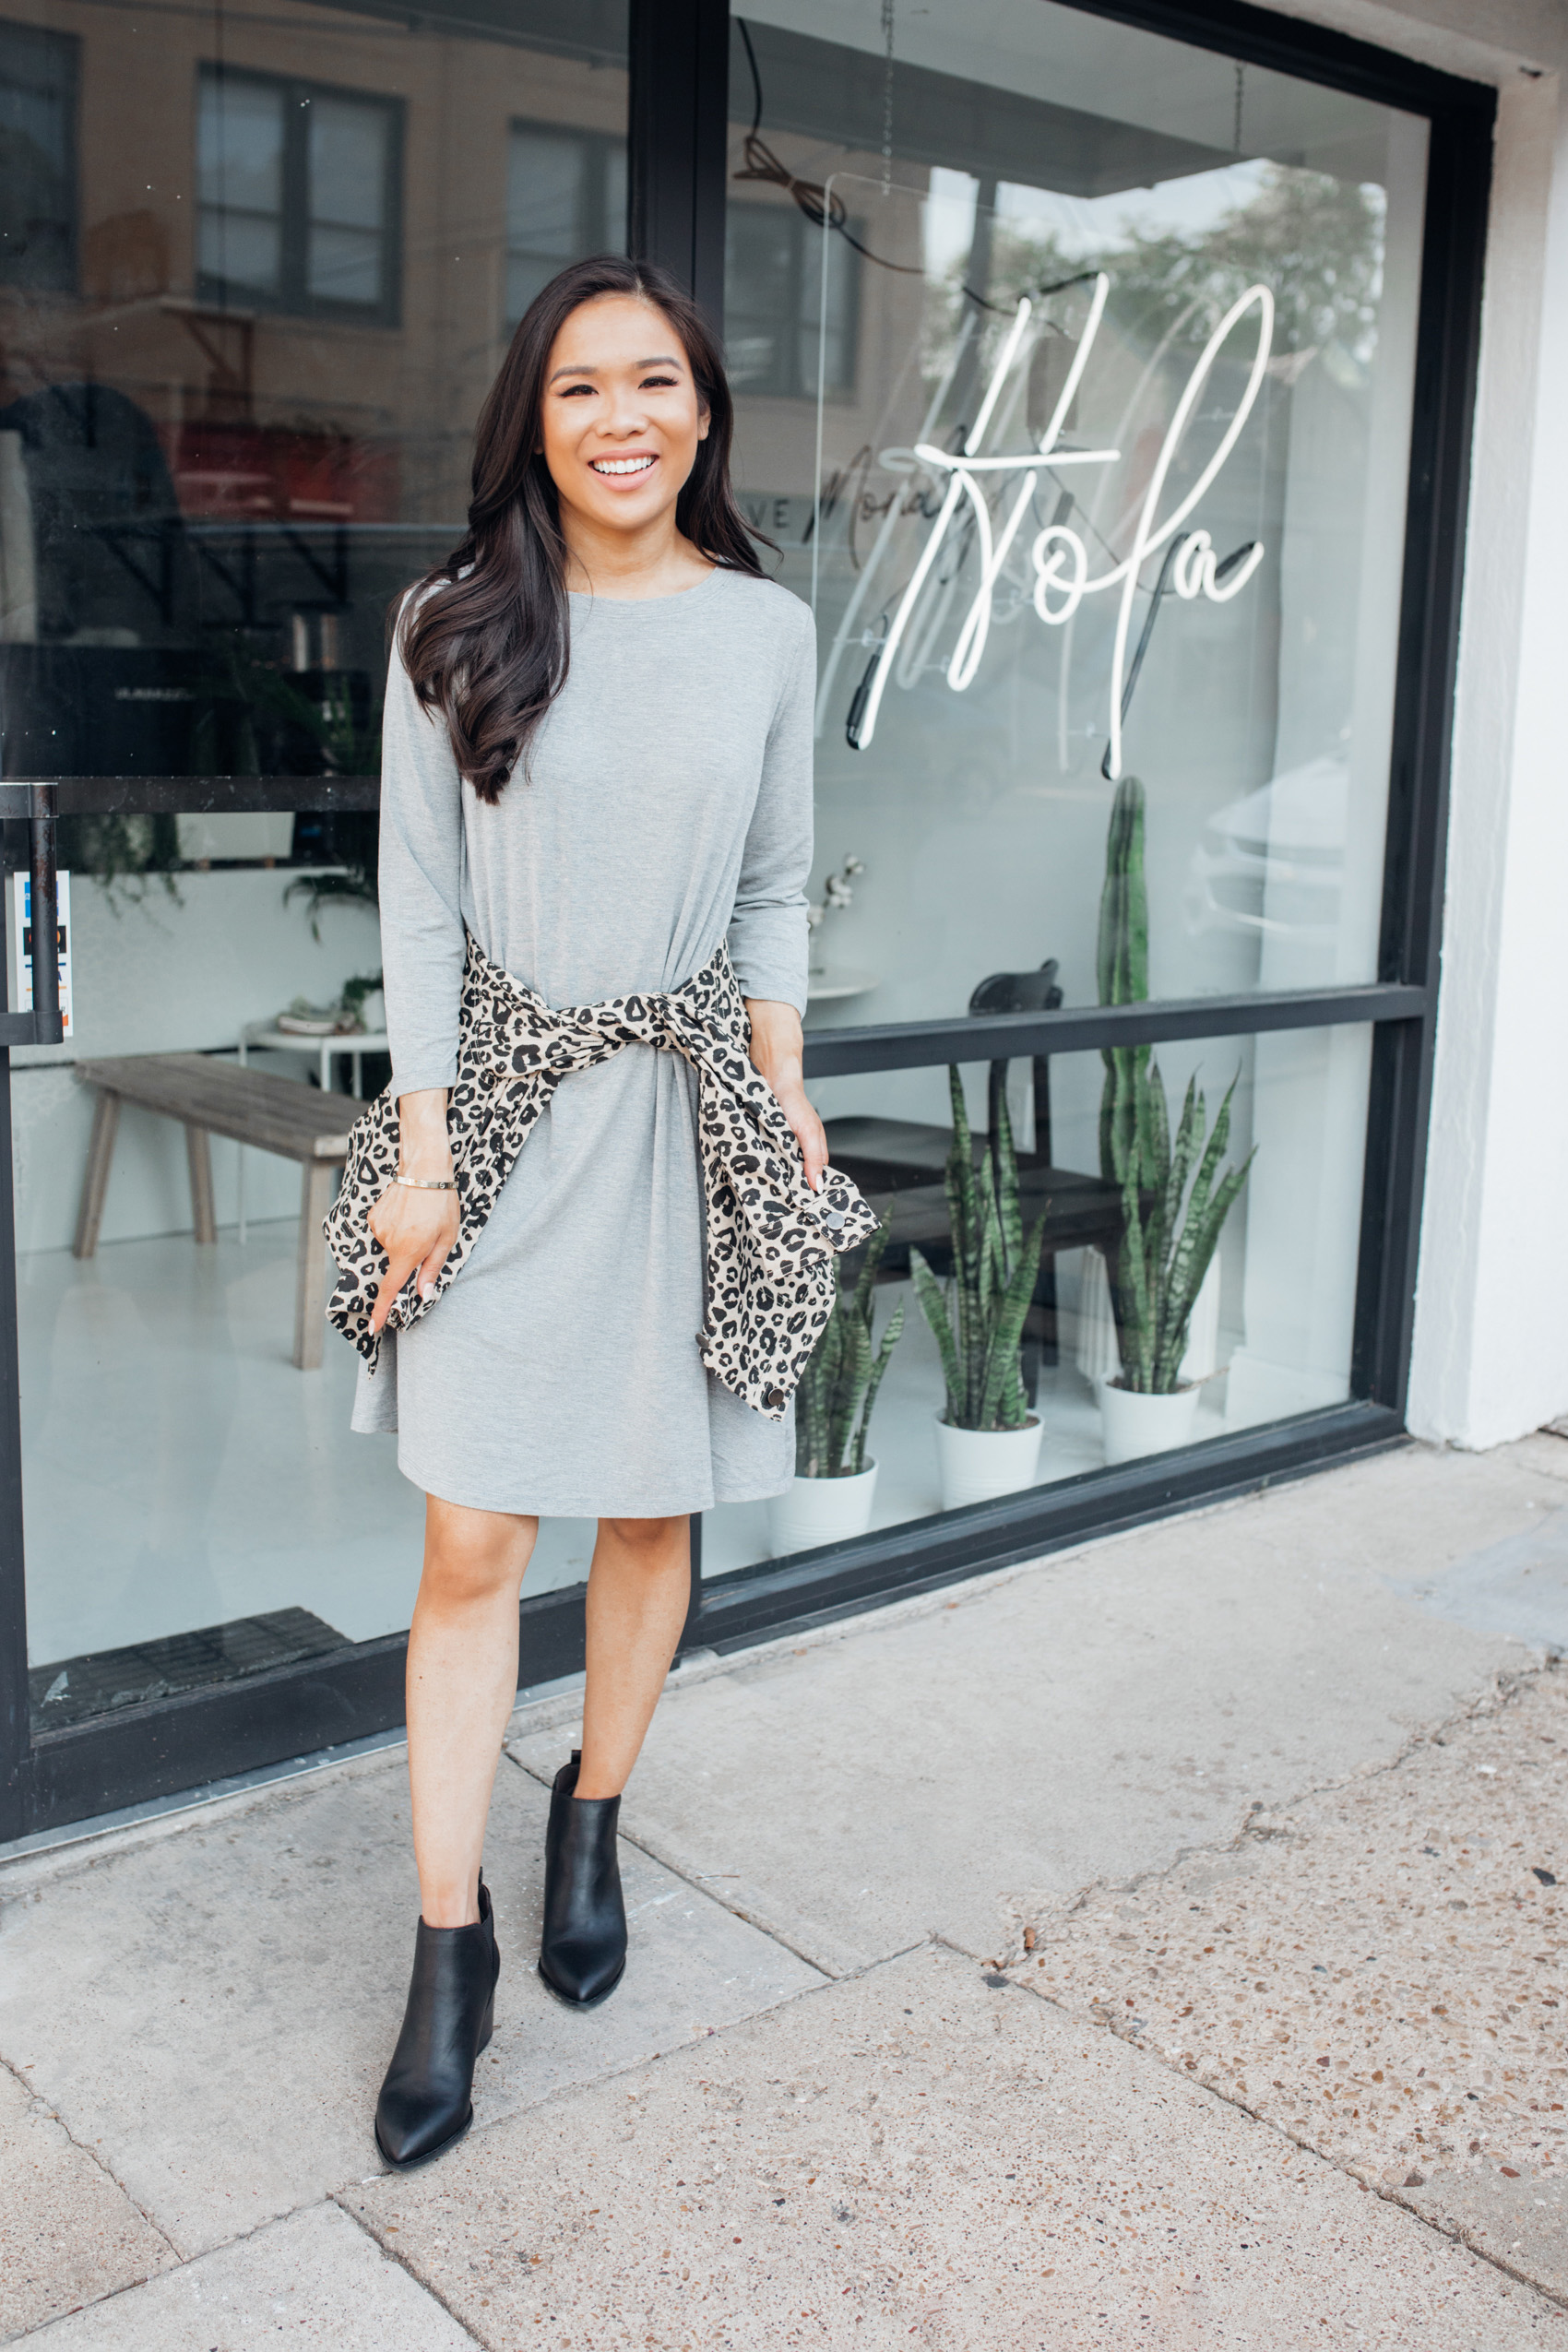 Blogger Hoang-Kim shares affordable fall fashion with Walmart wearing a gray shirt dress, leopard jacket and black booties for a fall outfit at Hola Cafe in Bishop Arts